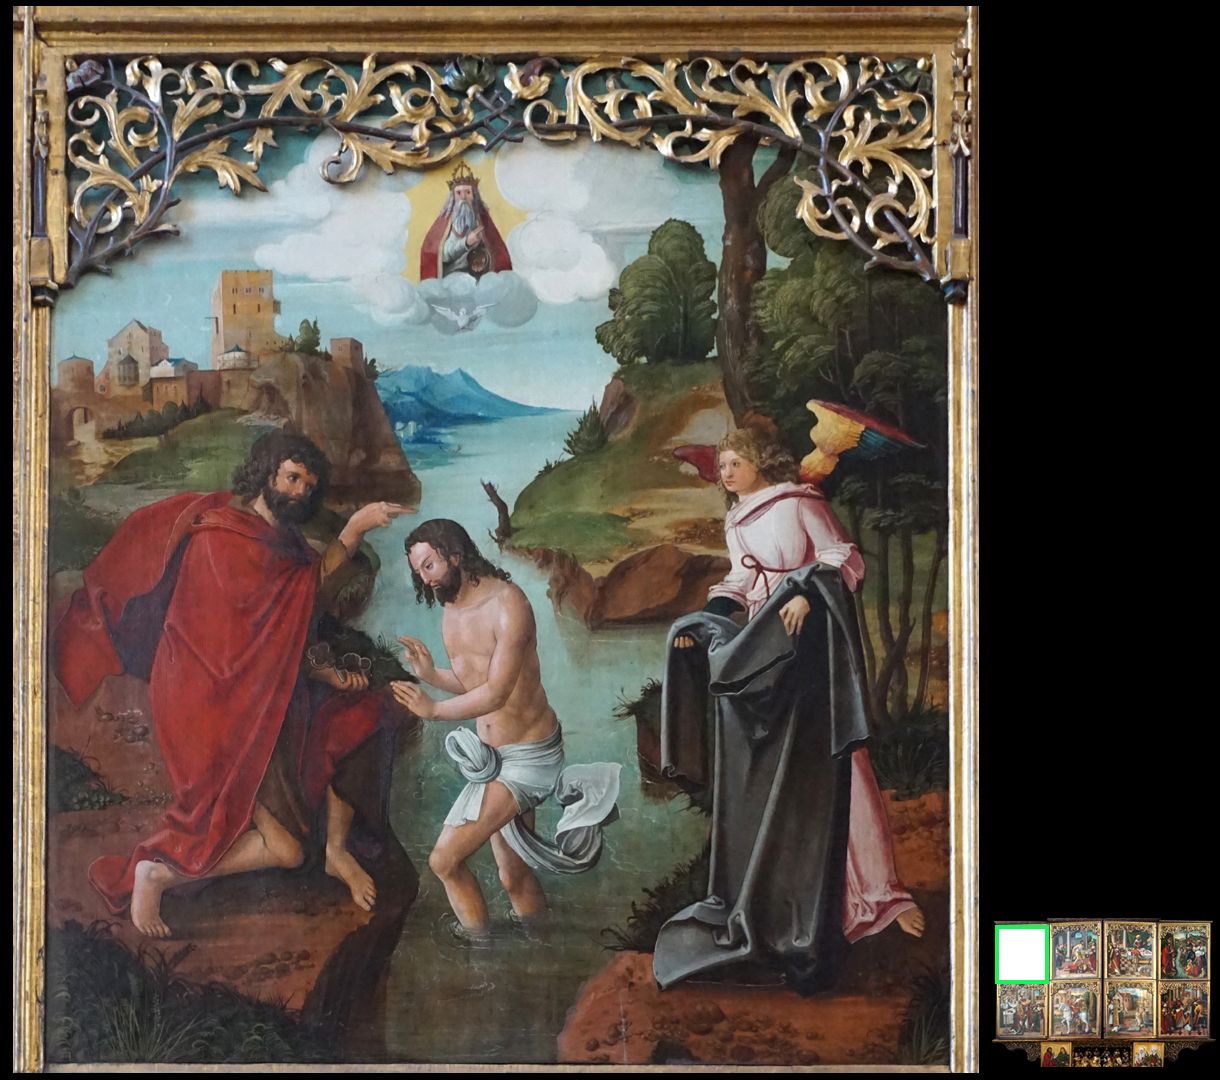 High altar / Schwabach / first conversion Baptism of Jesus by John in the Jordan River